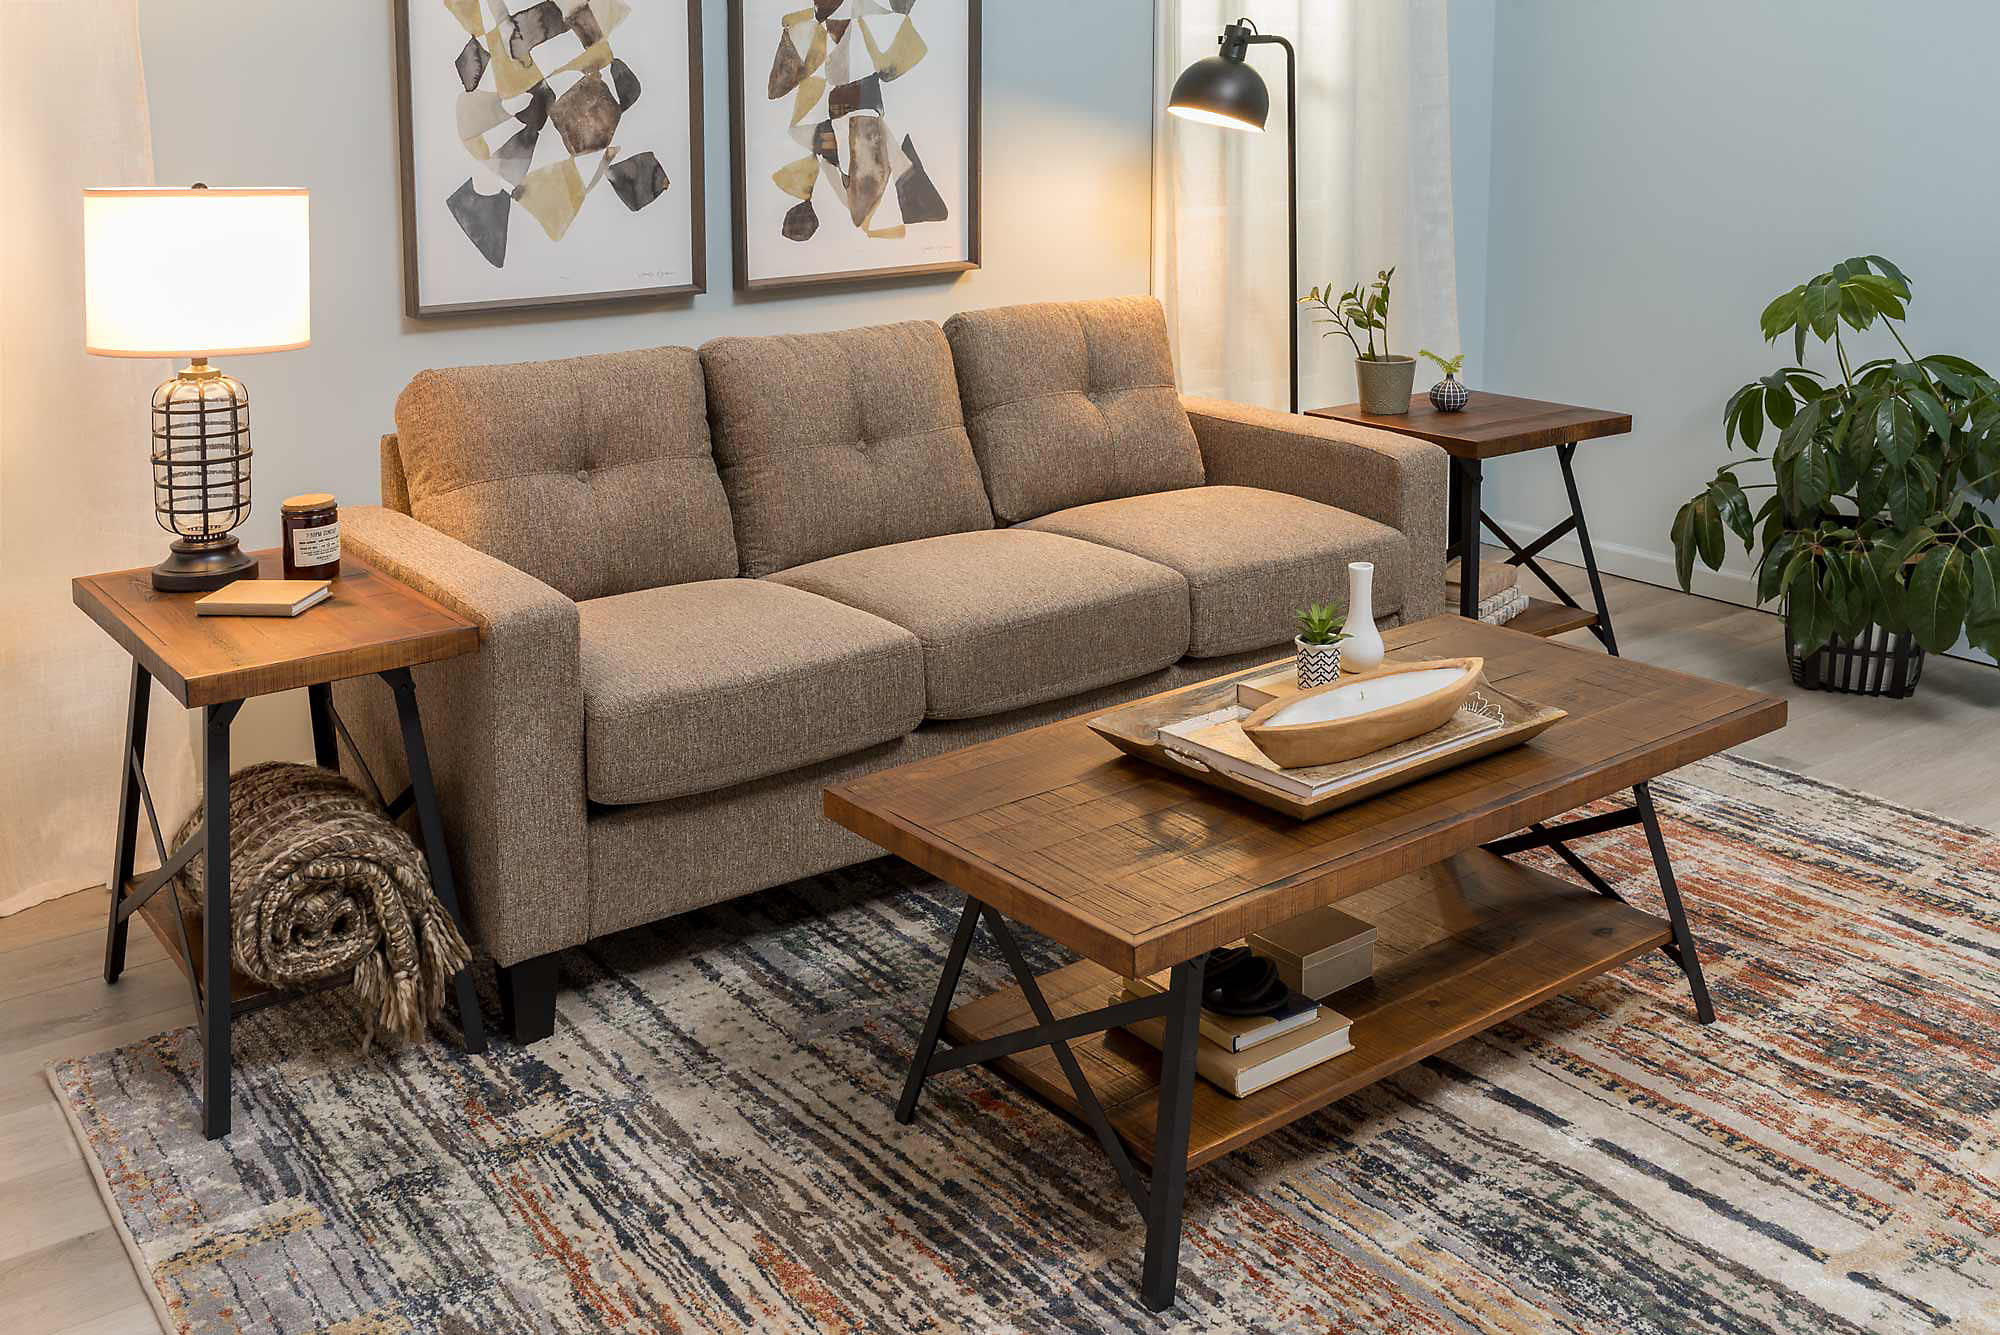 Tan Fabric Sofa Track Arm in Rustic Styled Room